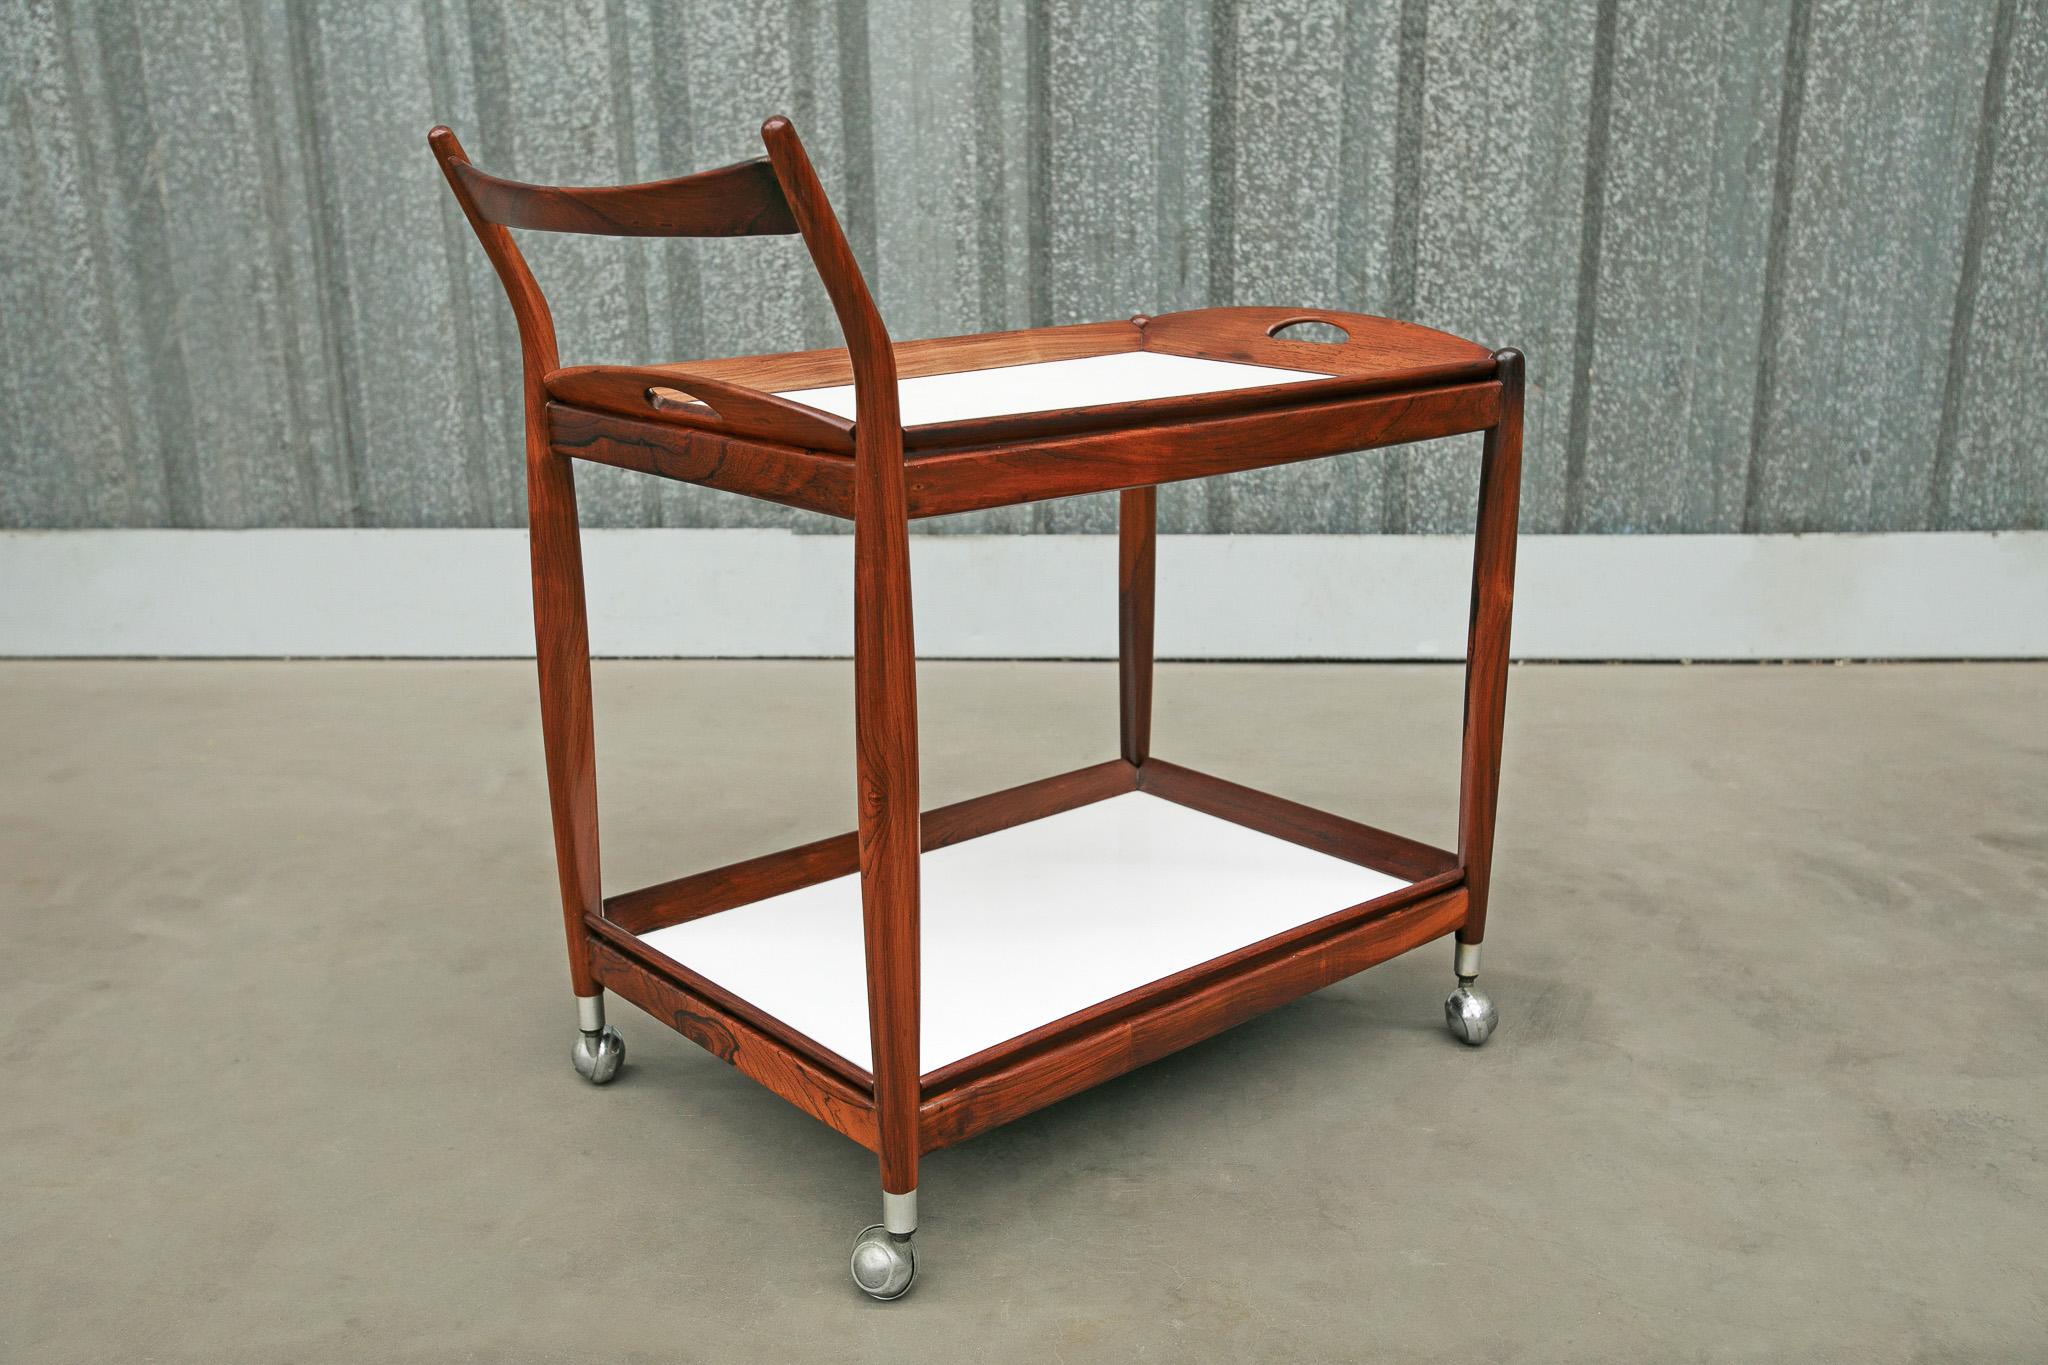 Available today, this Mid-Century Modern Bar cart in Hardwood and White Formica designed by Sergio Rodrigues in Brazil in the 60s is nothing less than spectacular! 

The bar cart is entirely made in Brazilian Rosewood (known as Jacaranda) with the